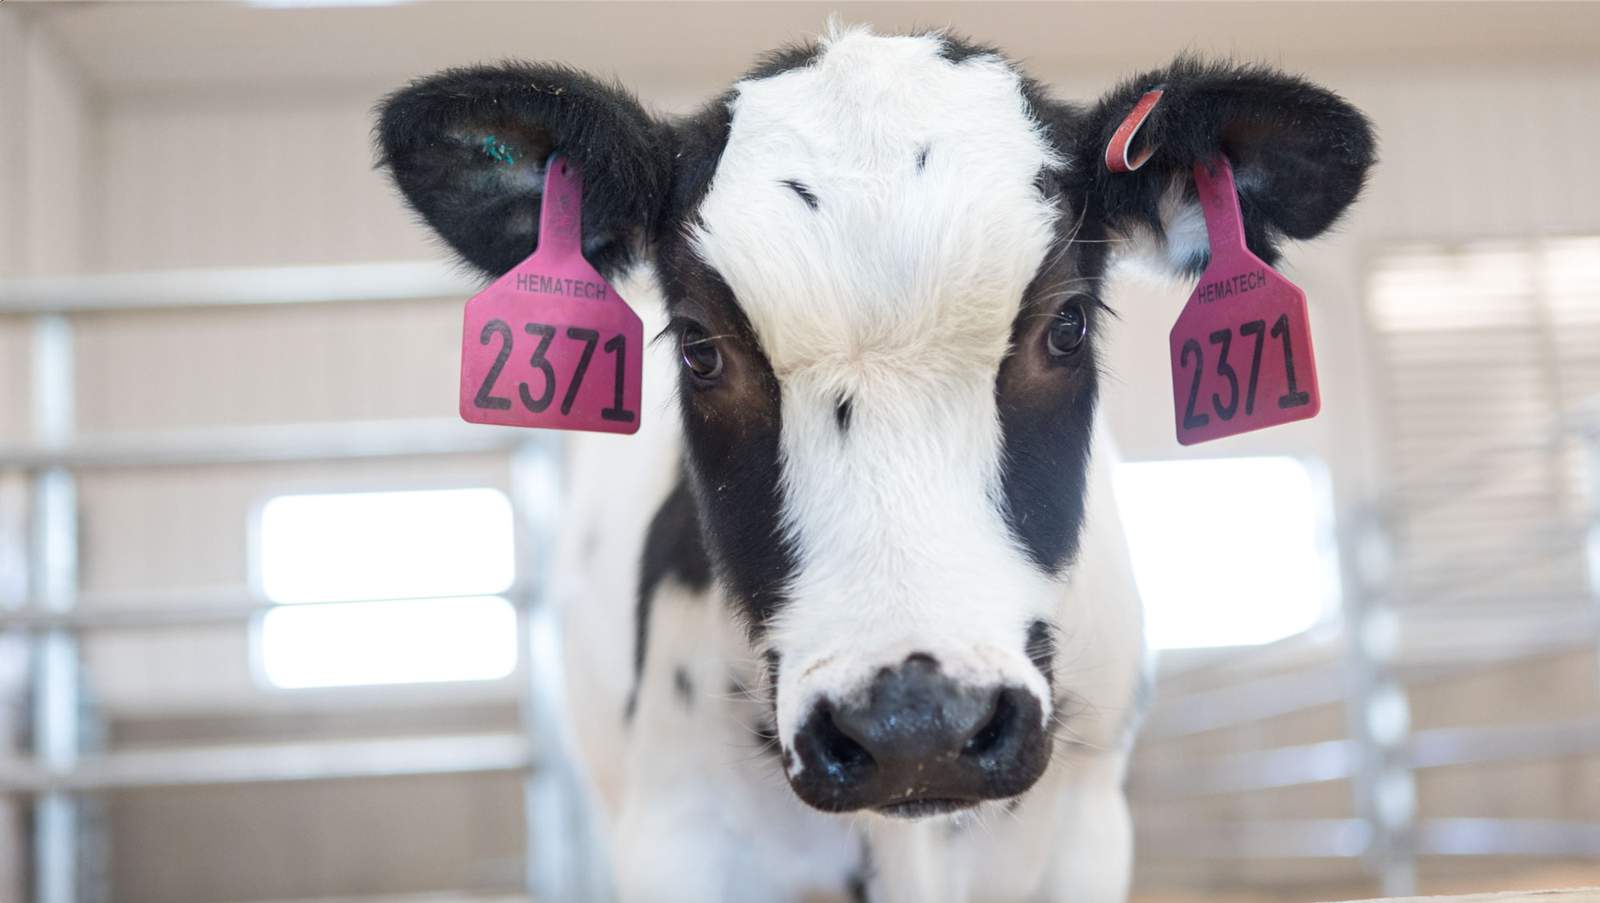 Human trials expected to start next month for Covid-19 treatment derived from cows blood